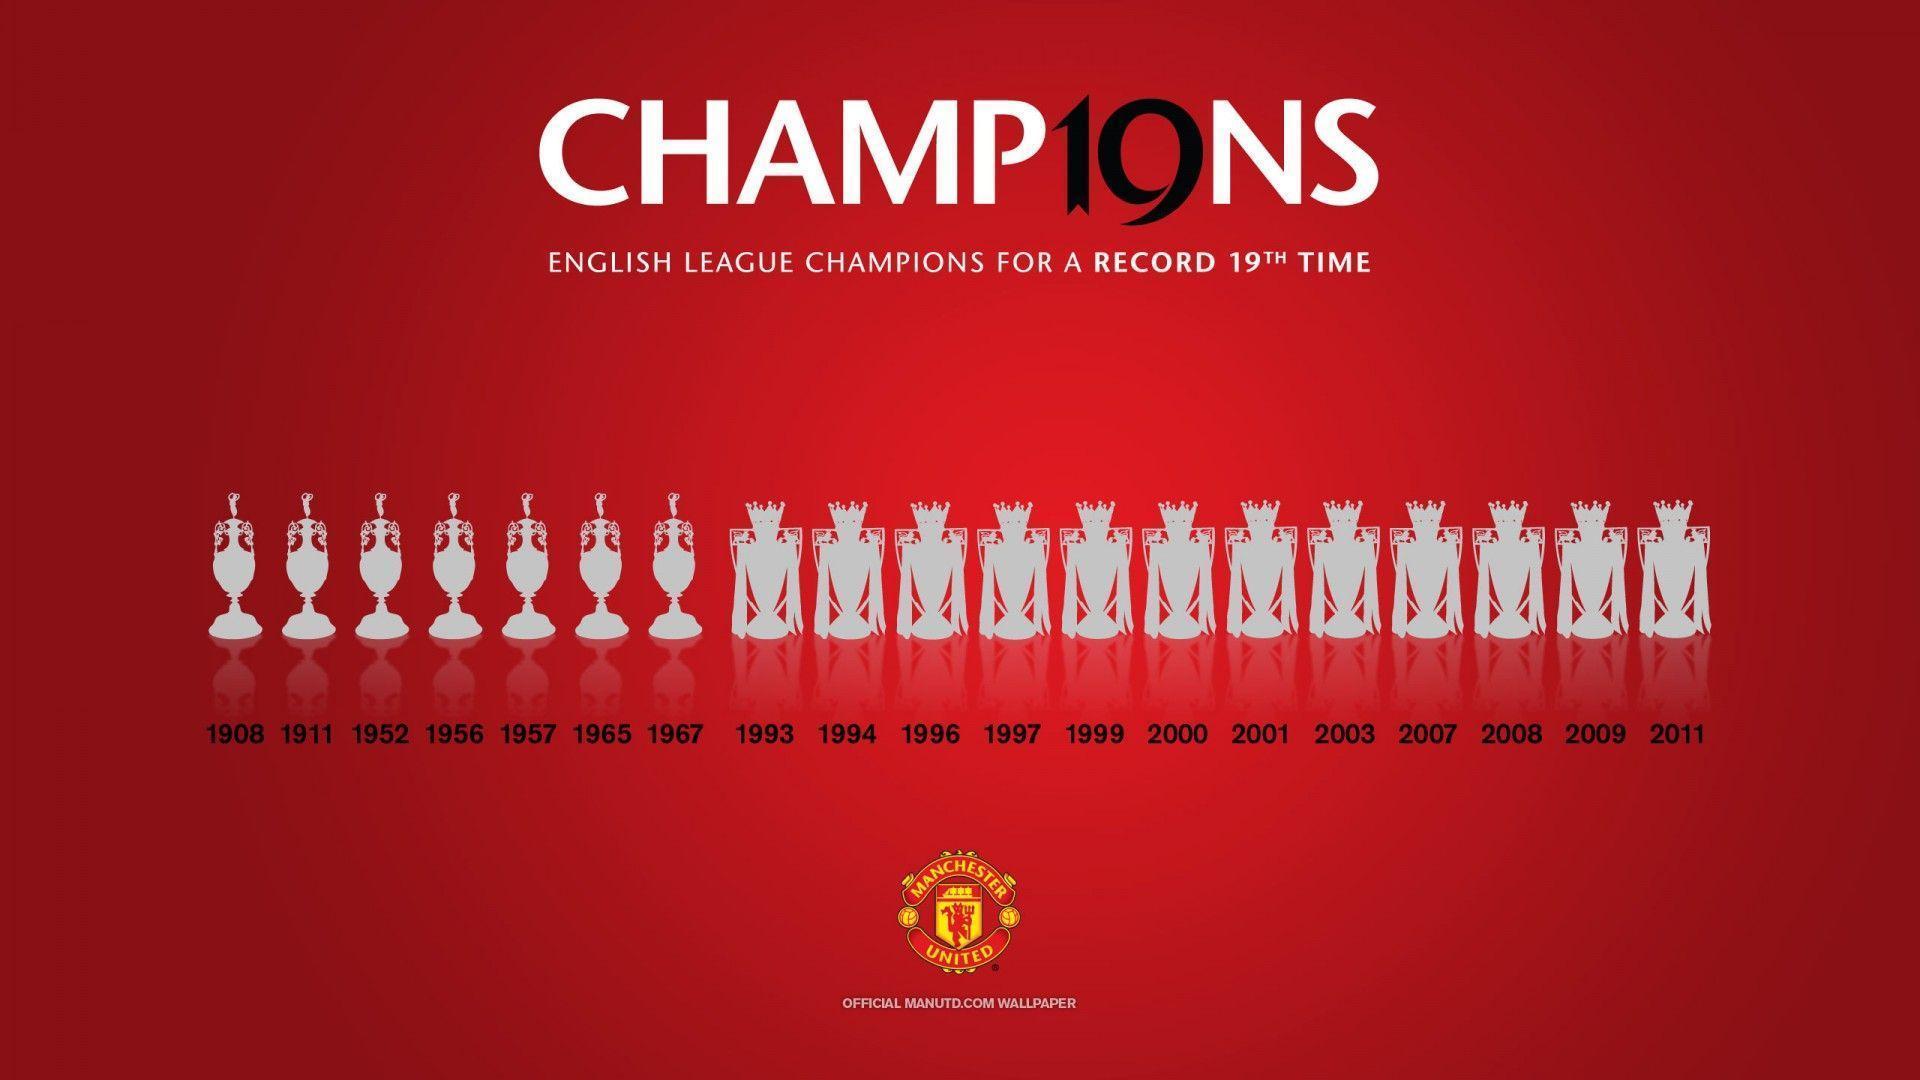 Manchester United Wallpapers Wallpaper Cave